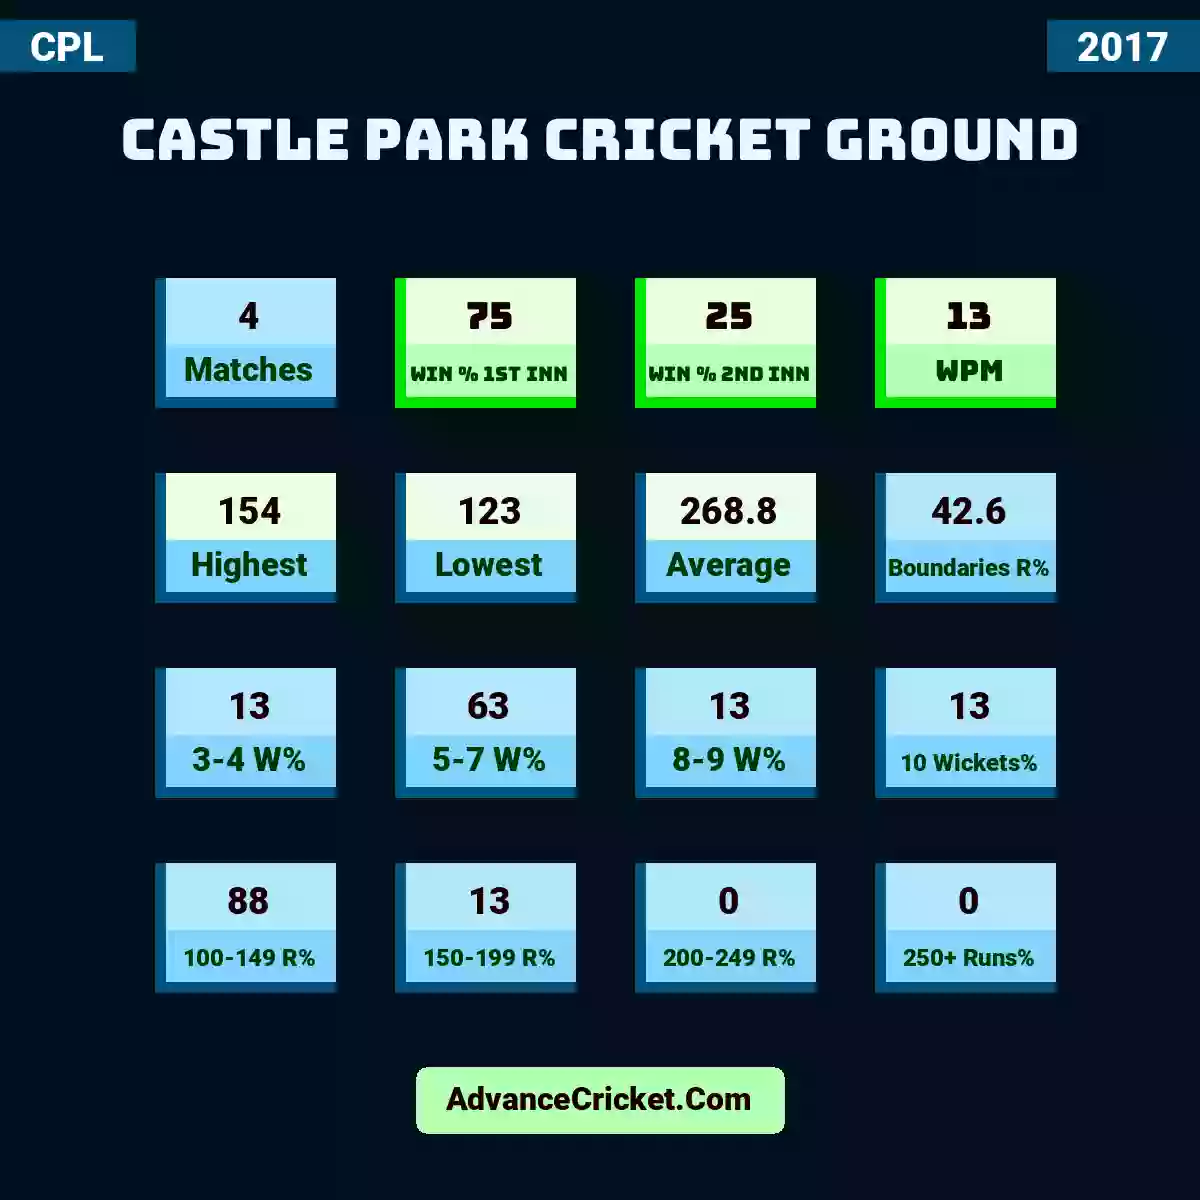 Image showing Castle Park Cricket Ground with Matches: 4, Win % 1st Inn: 75, Win % 2nd Inn: 25, WPM: 13, Highest: 154, Lowest: 123, Average: 268.8, Boundaries R%: 42.6, 3-4 W%: 13, 5-7 W%: 63, 8-9 W%: 13, 10 Wickets%: 13, 100-149 R%: 88, 150-199 R%: 13, 200-249 R%: 0, 250+ Runs%: 0.